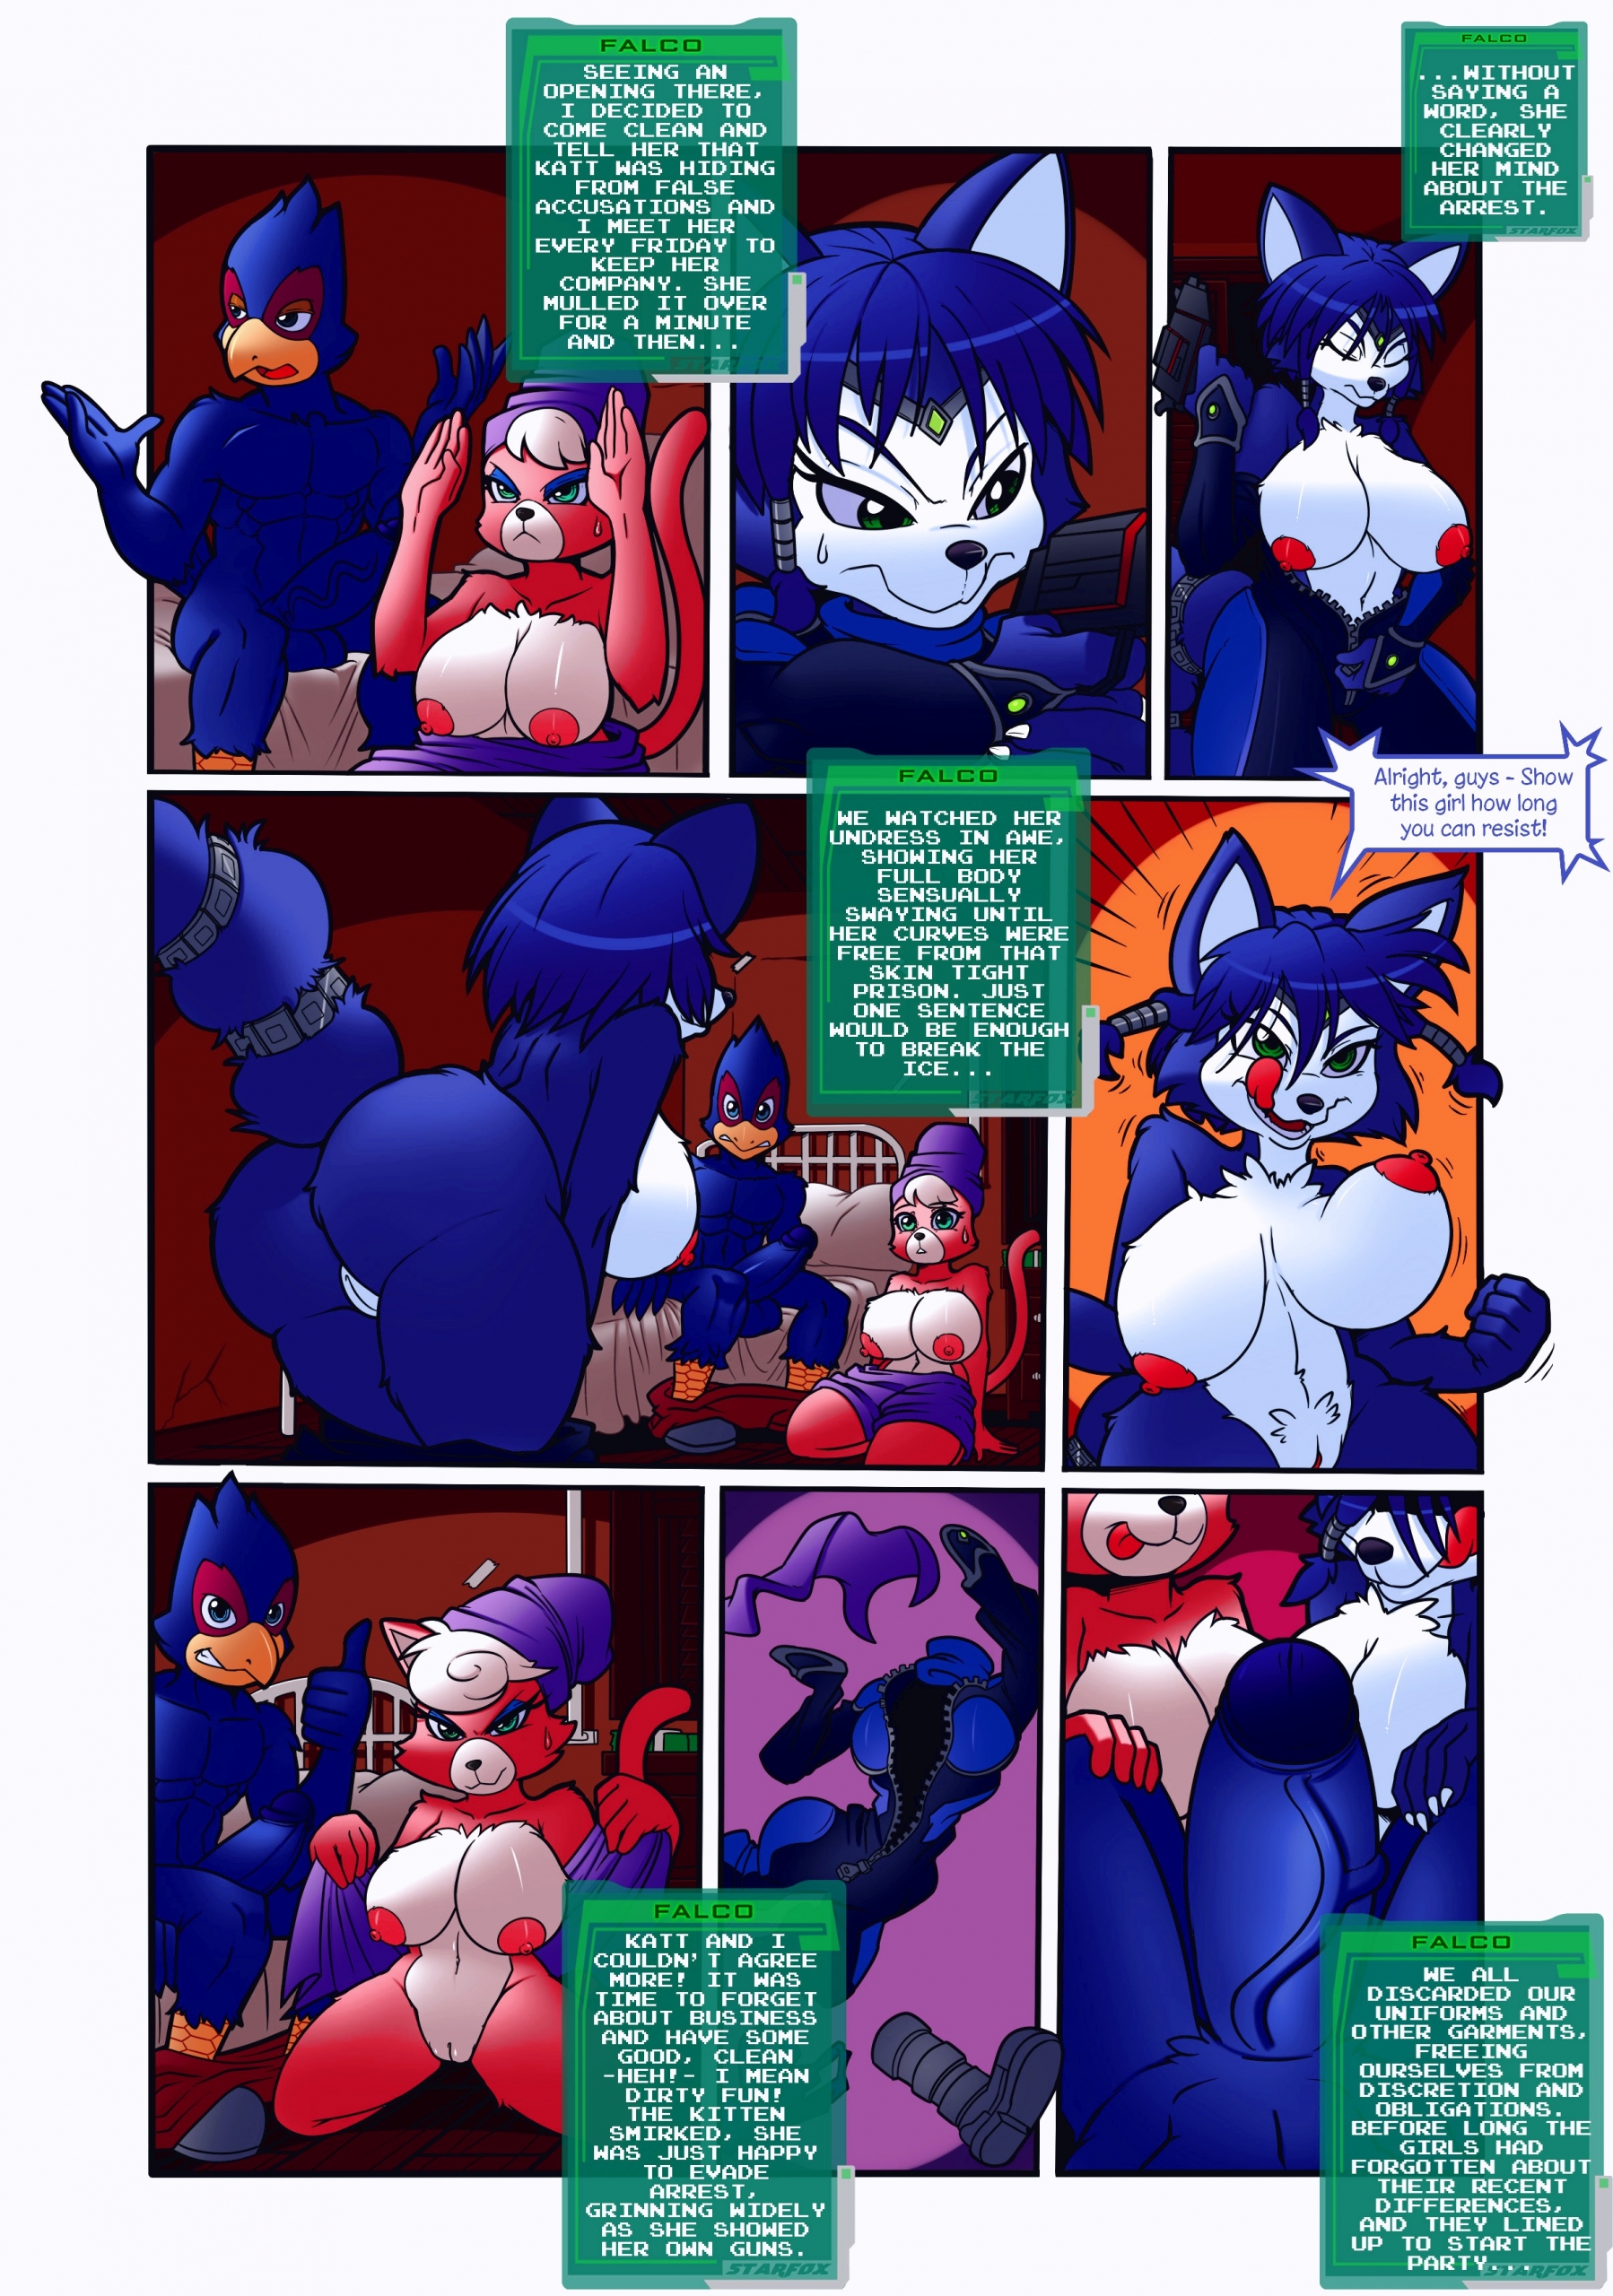 Assault and Flattery porn comic page 005